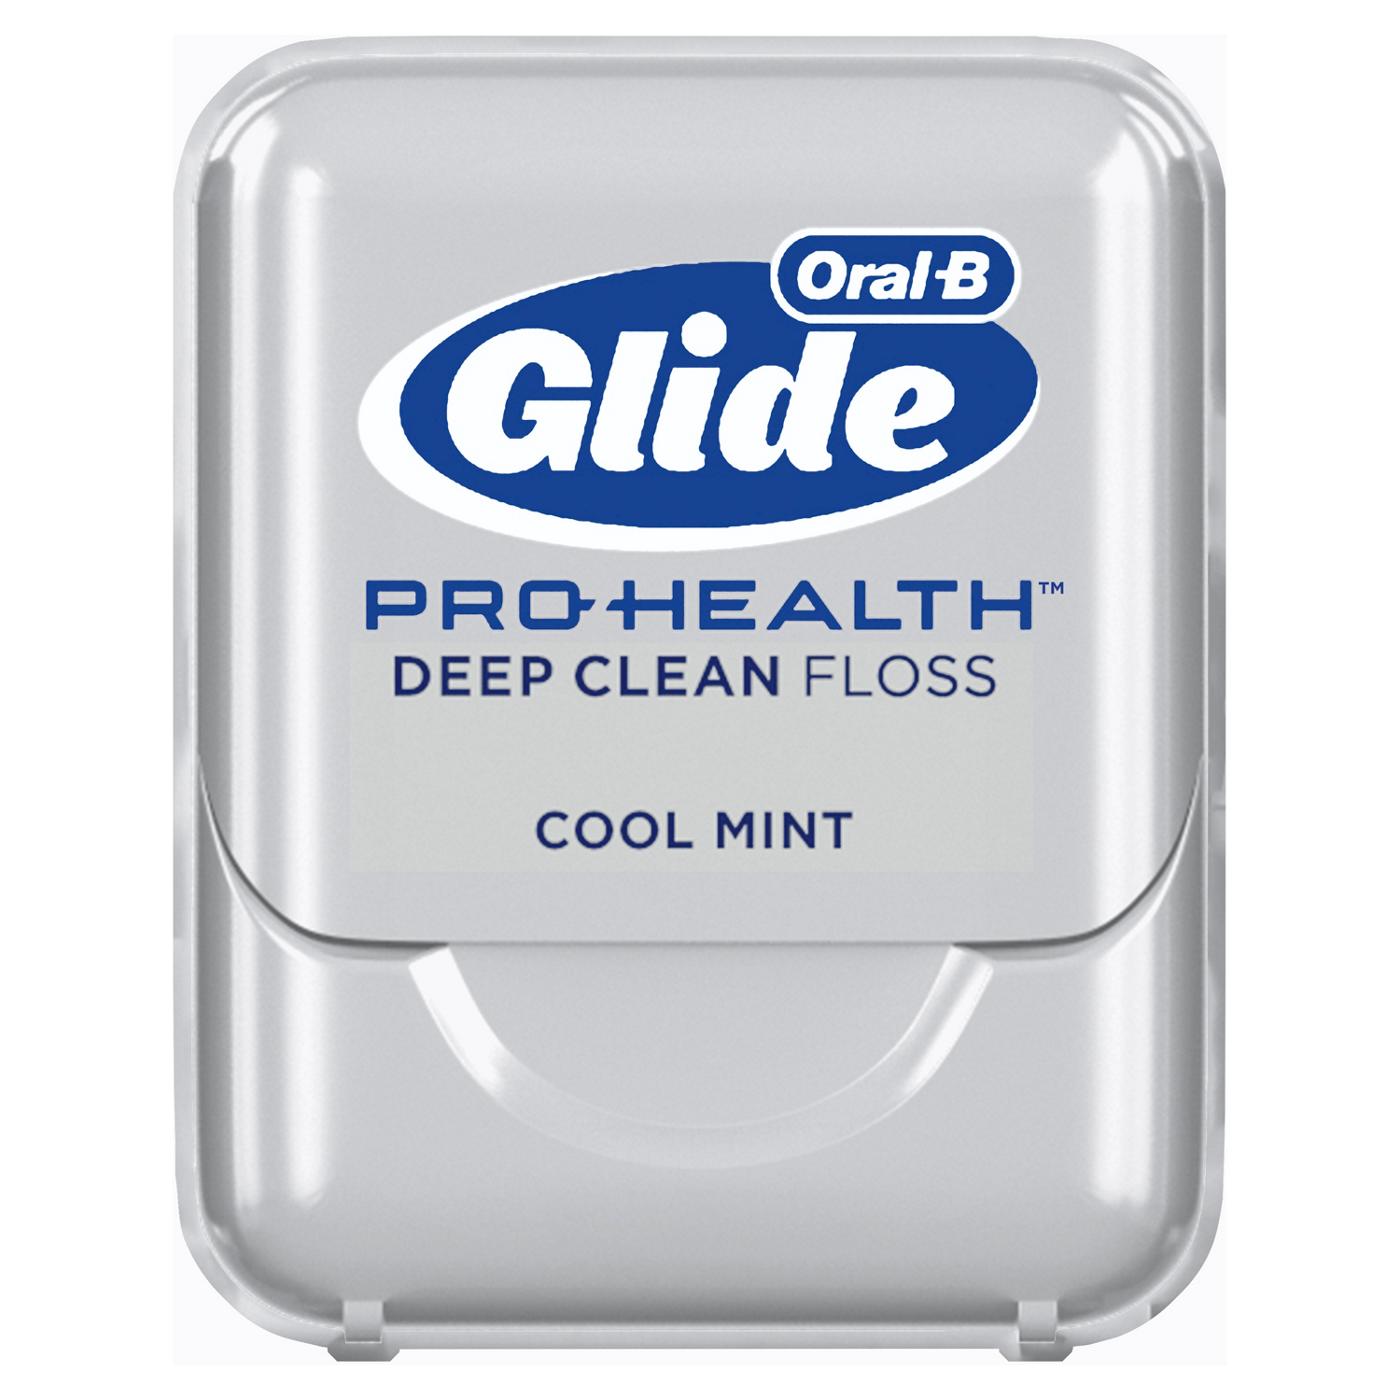 Oral-B Glide Pro-Health Deep Clean Floss - Cool Mint; image 9 of 9